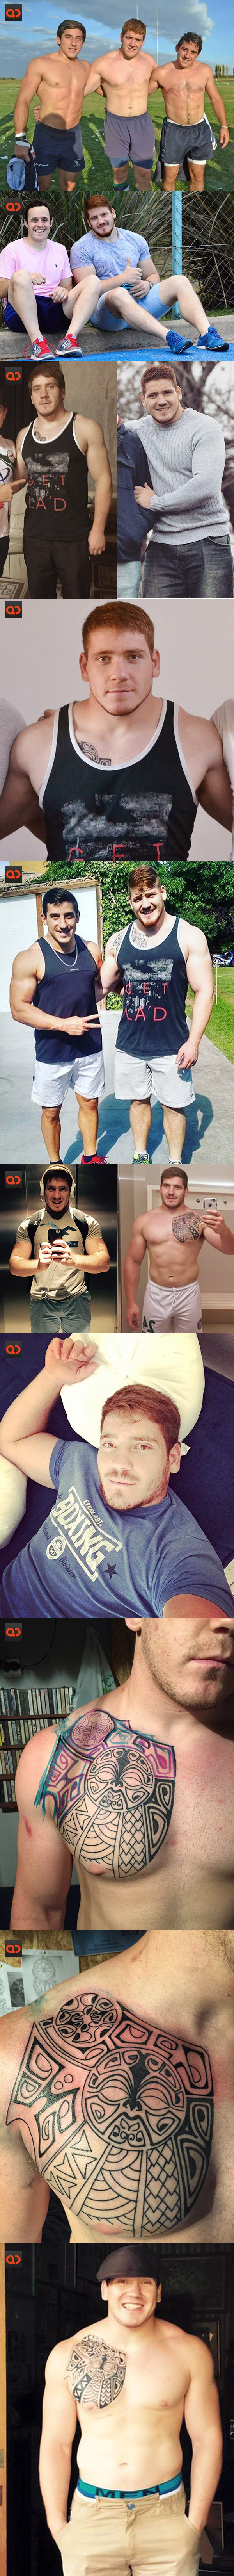 Andrés Enrique, Argentine Rugby Player, Naked Photos Leak - Ginger Cock Exposed!